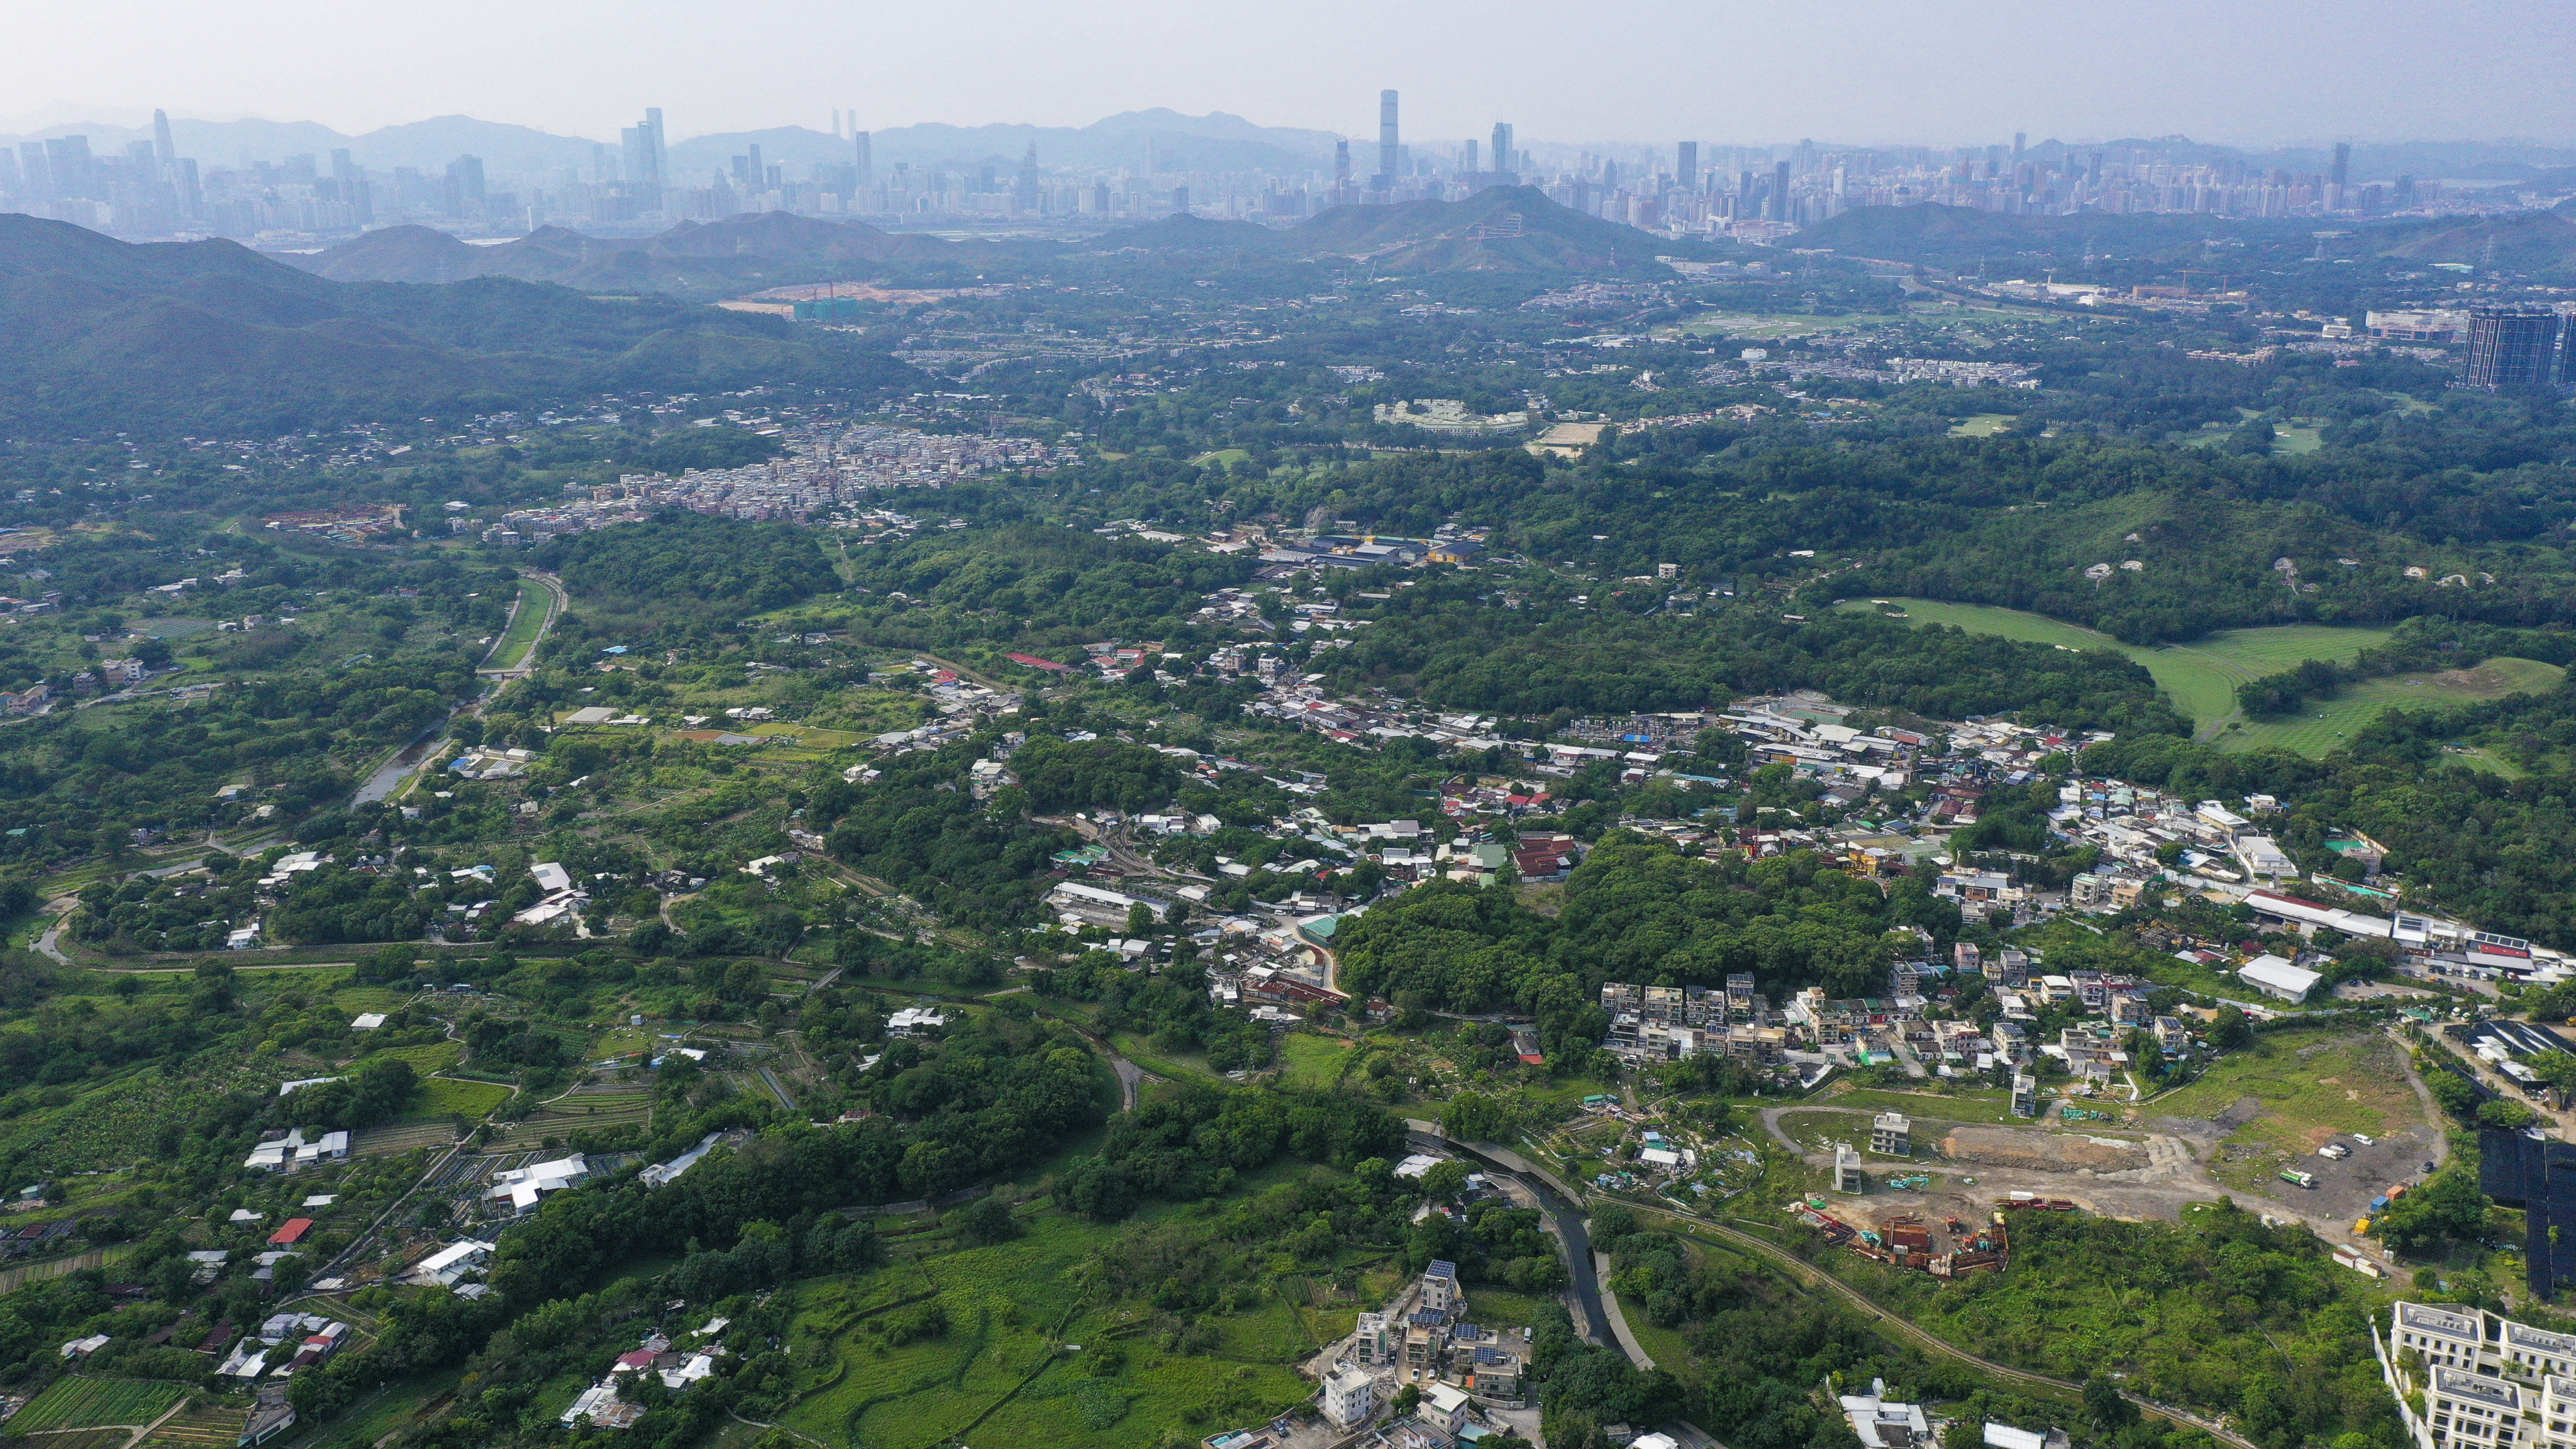 About 90 per cent of the land to be resumed will be taken to develop the Northern Metropolis. Photo: May Tse